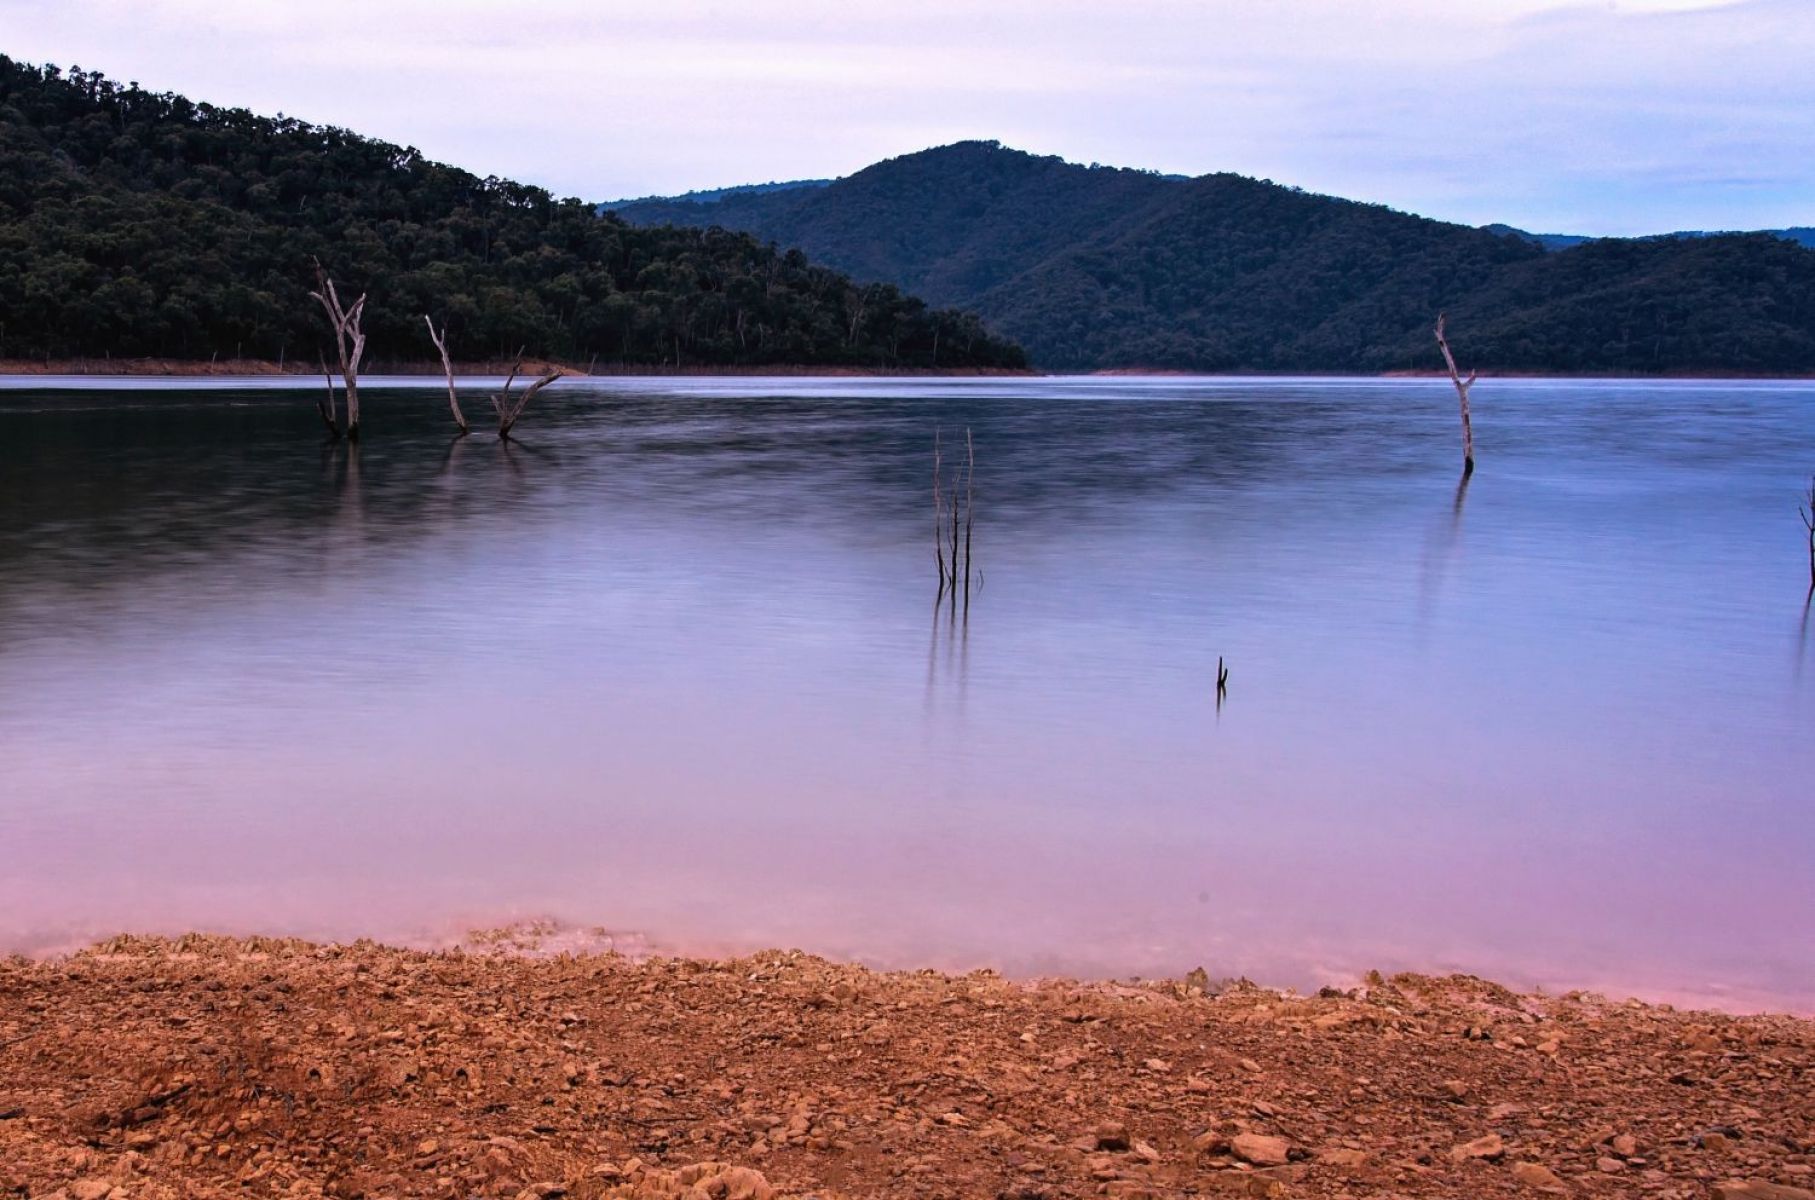 Lake Eildon at sunset with hills in the background and dead trees sticking out of the water